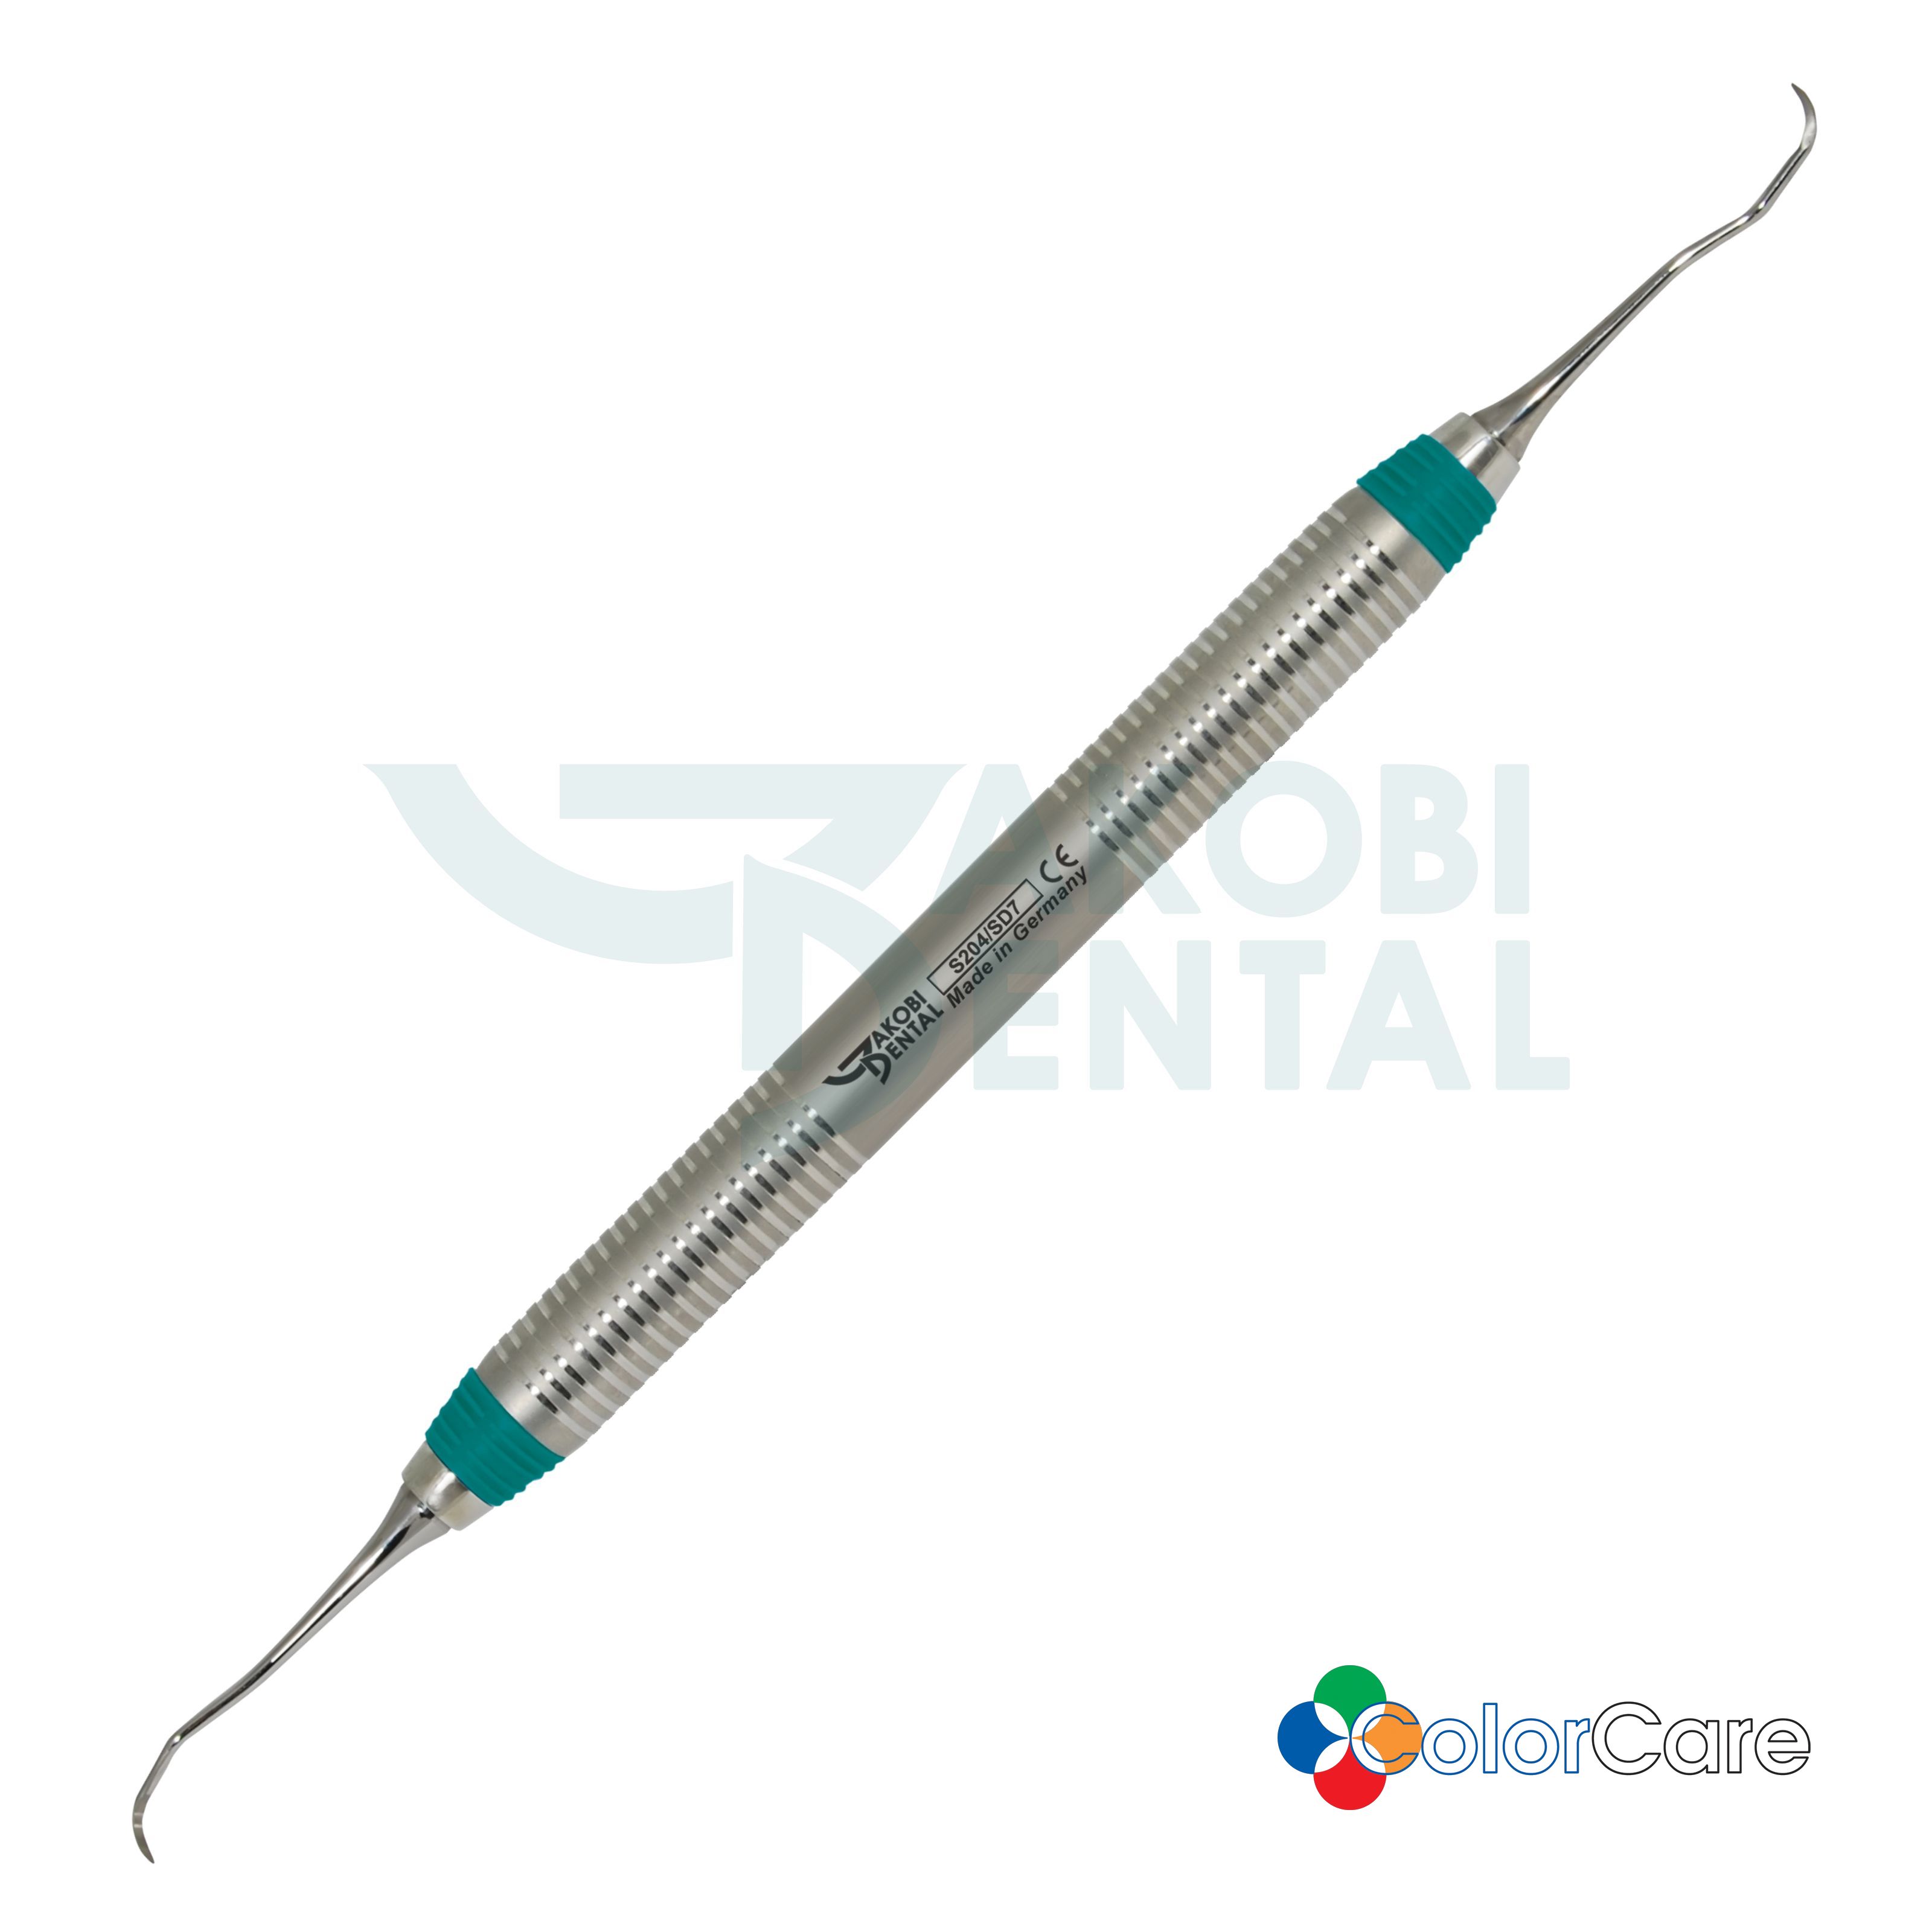 Scaler S 204SD, ColorCare Griff # 7